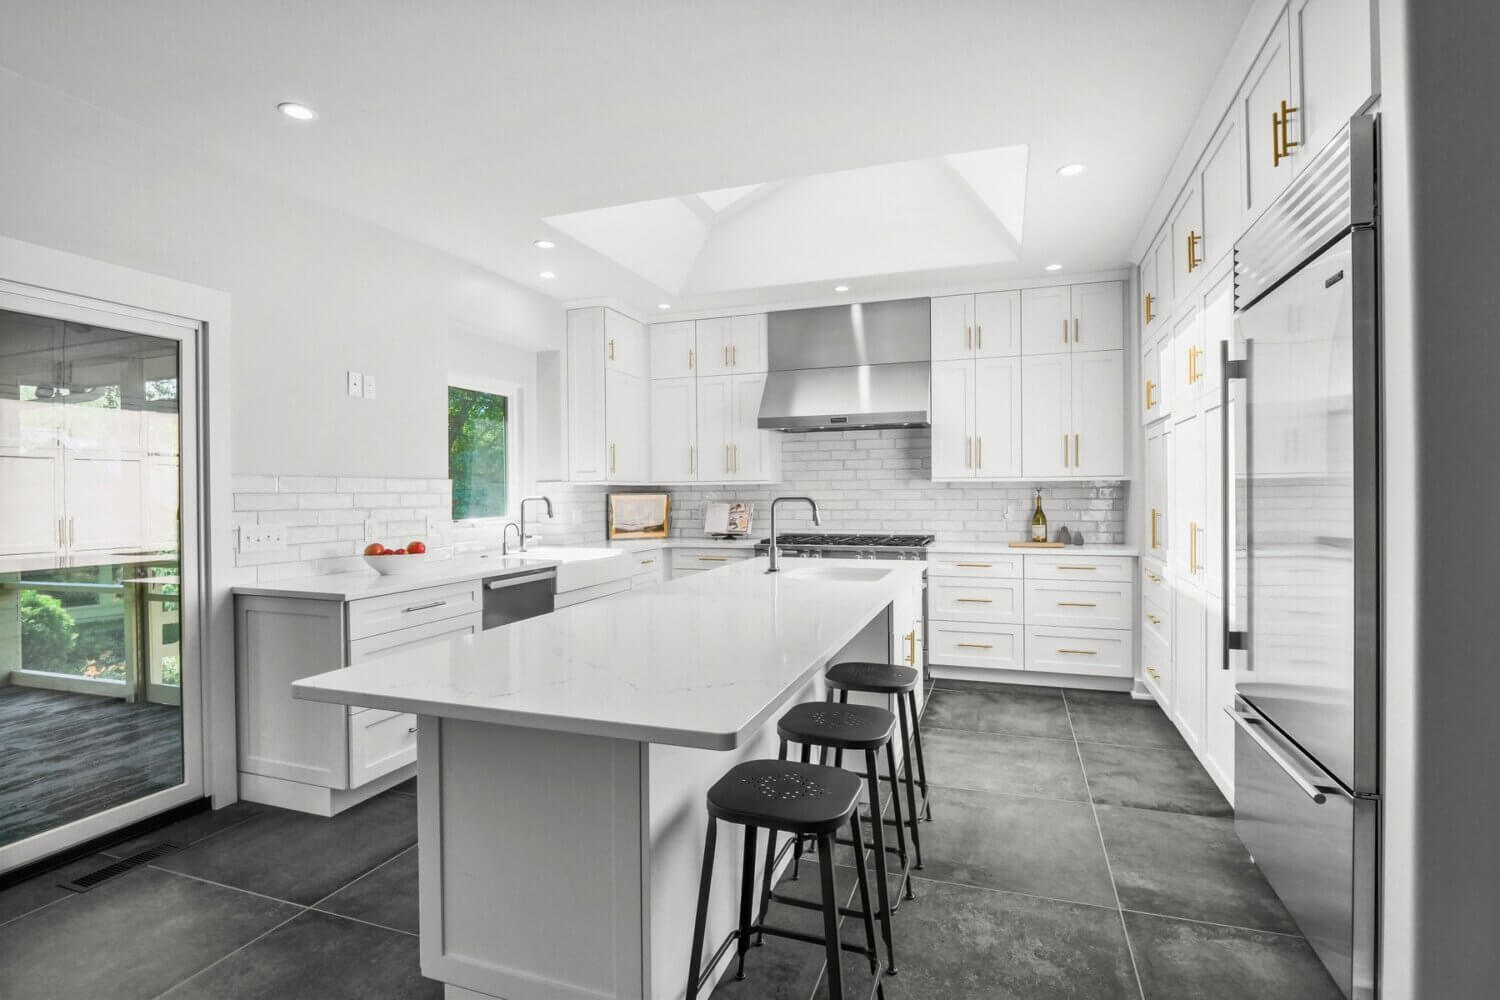 Dura Supreme Cabinetry in the Homestead Panel door style in “White” paint complements the quite diverse range of metals used throughout the kitchen from handles to appliances to island seating.